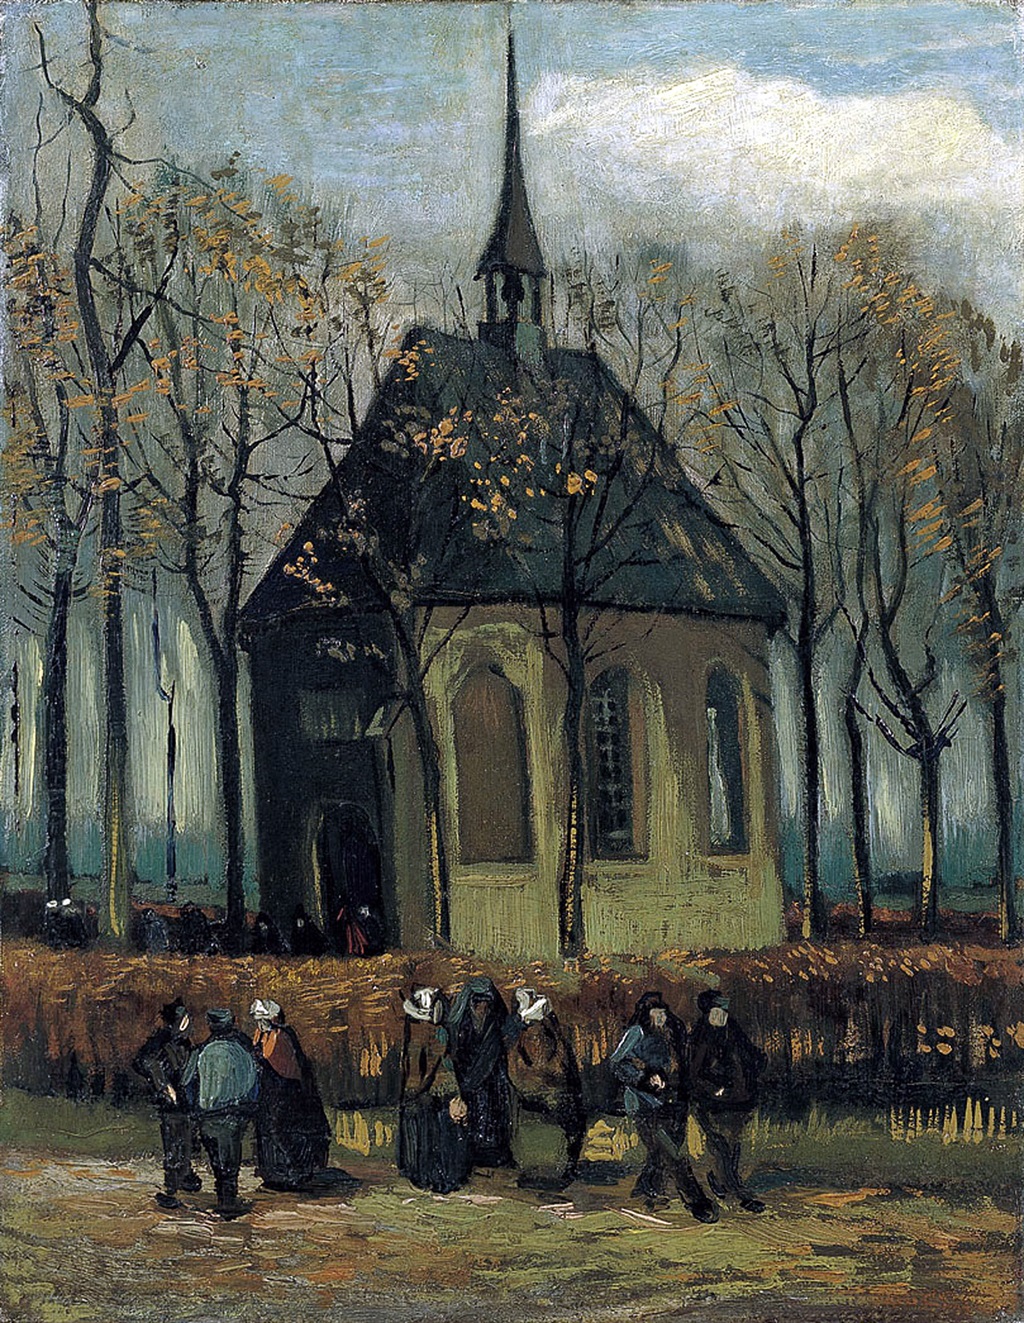 This is the image of the 1882 painting by Dutch ar